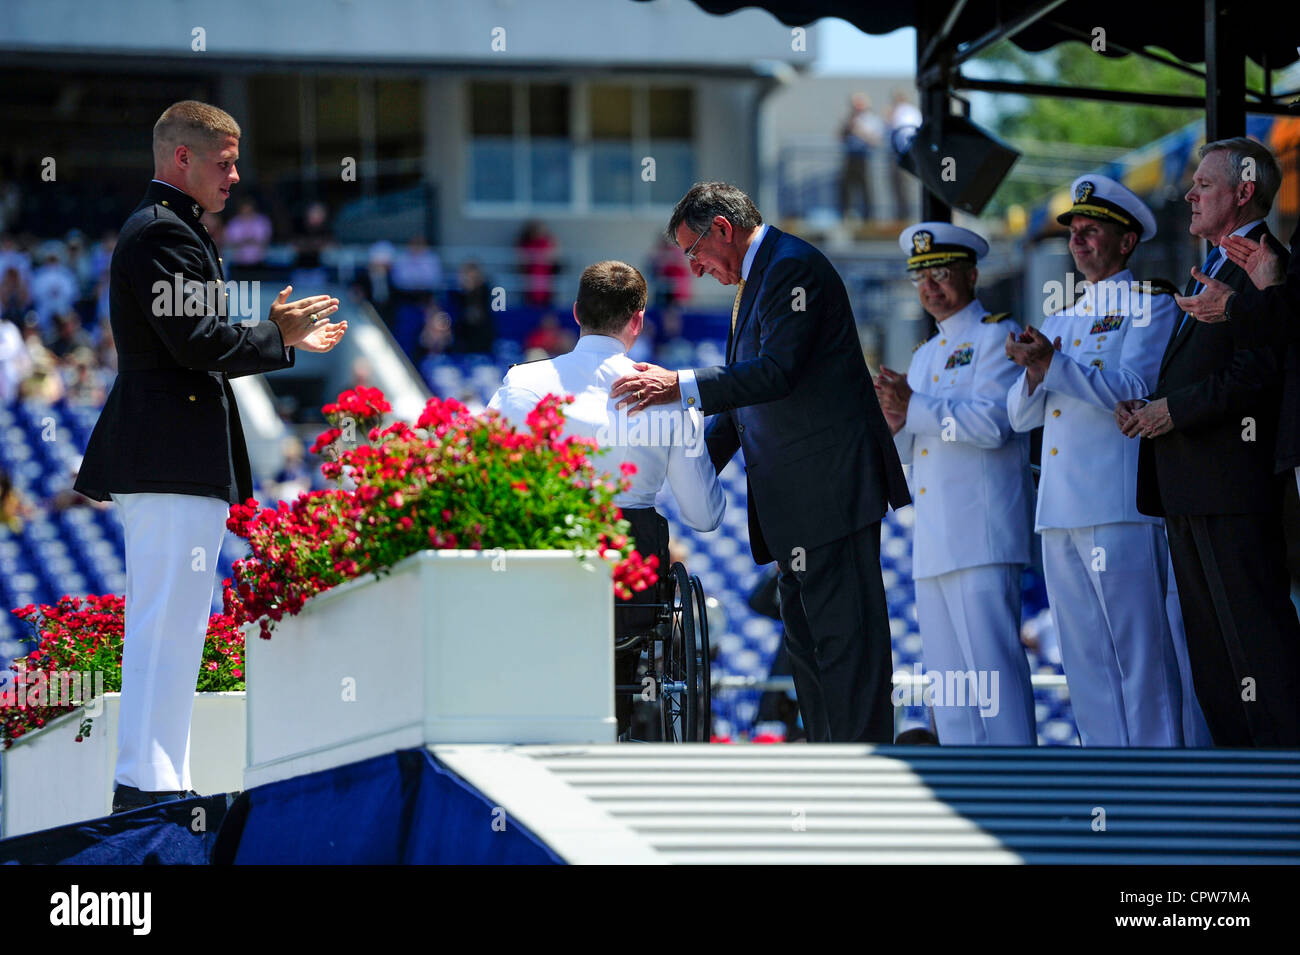 Secretary of Defense Leon Panetta congratulates Kevin Hillery upon his graduation from the U.S. Naval Academy. Despite an accident in April that left him paralyzed, Hillery was still allowed to graduate from the academy. Stock Photo